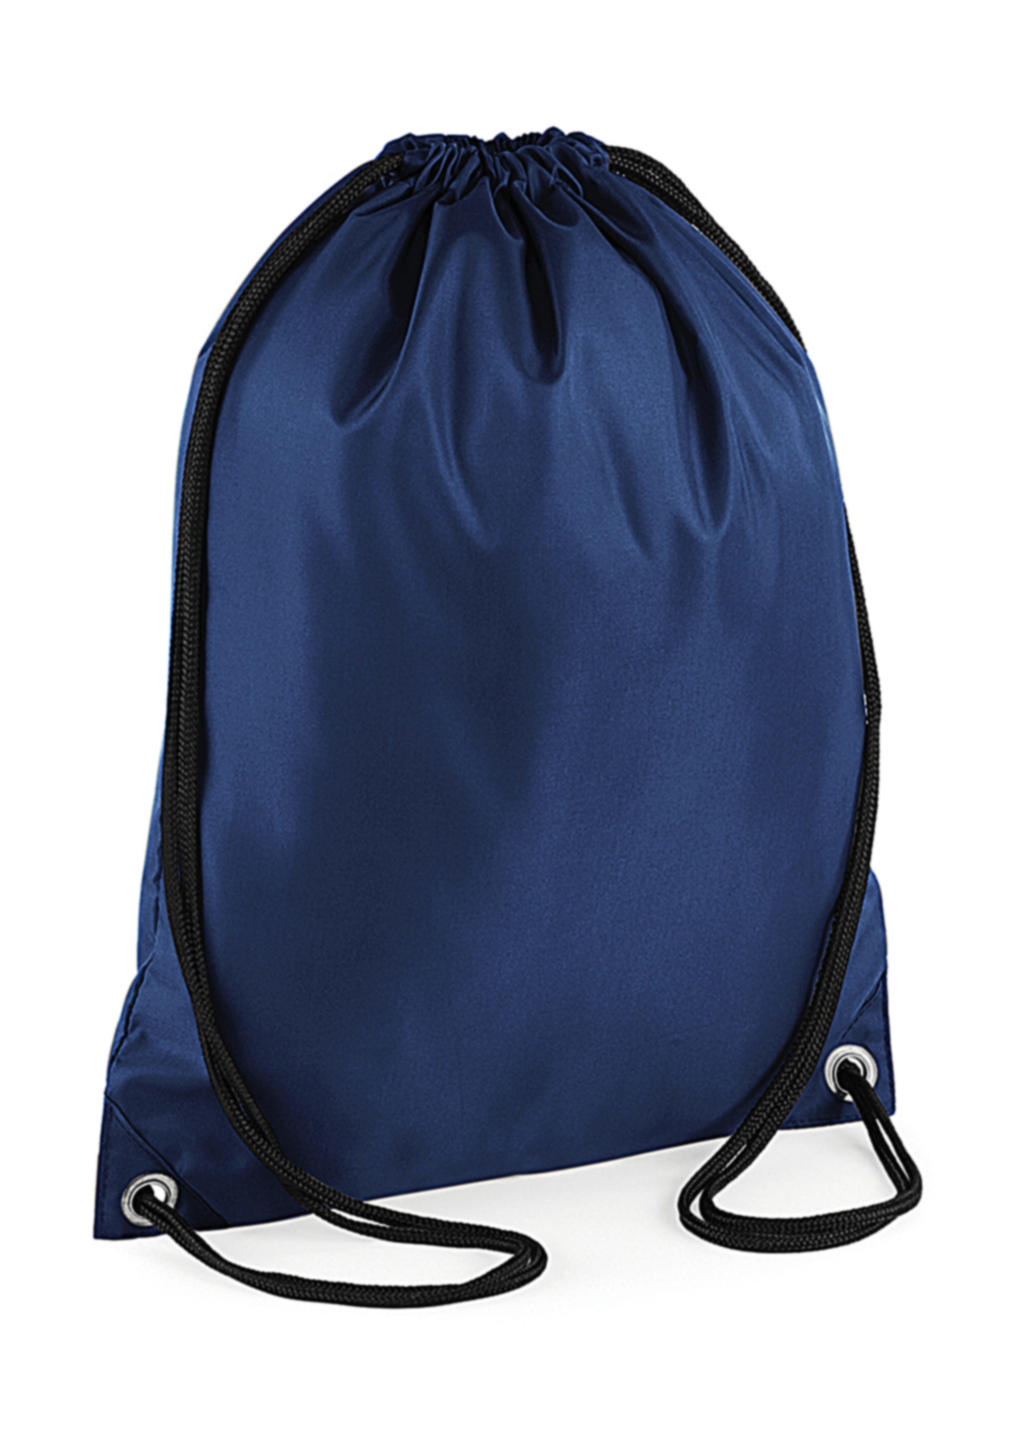  Budget Gymsac in Farbe Navy